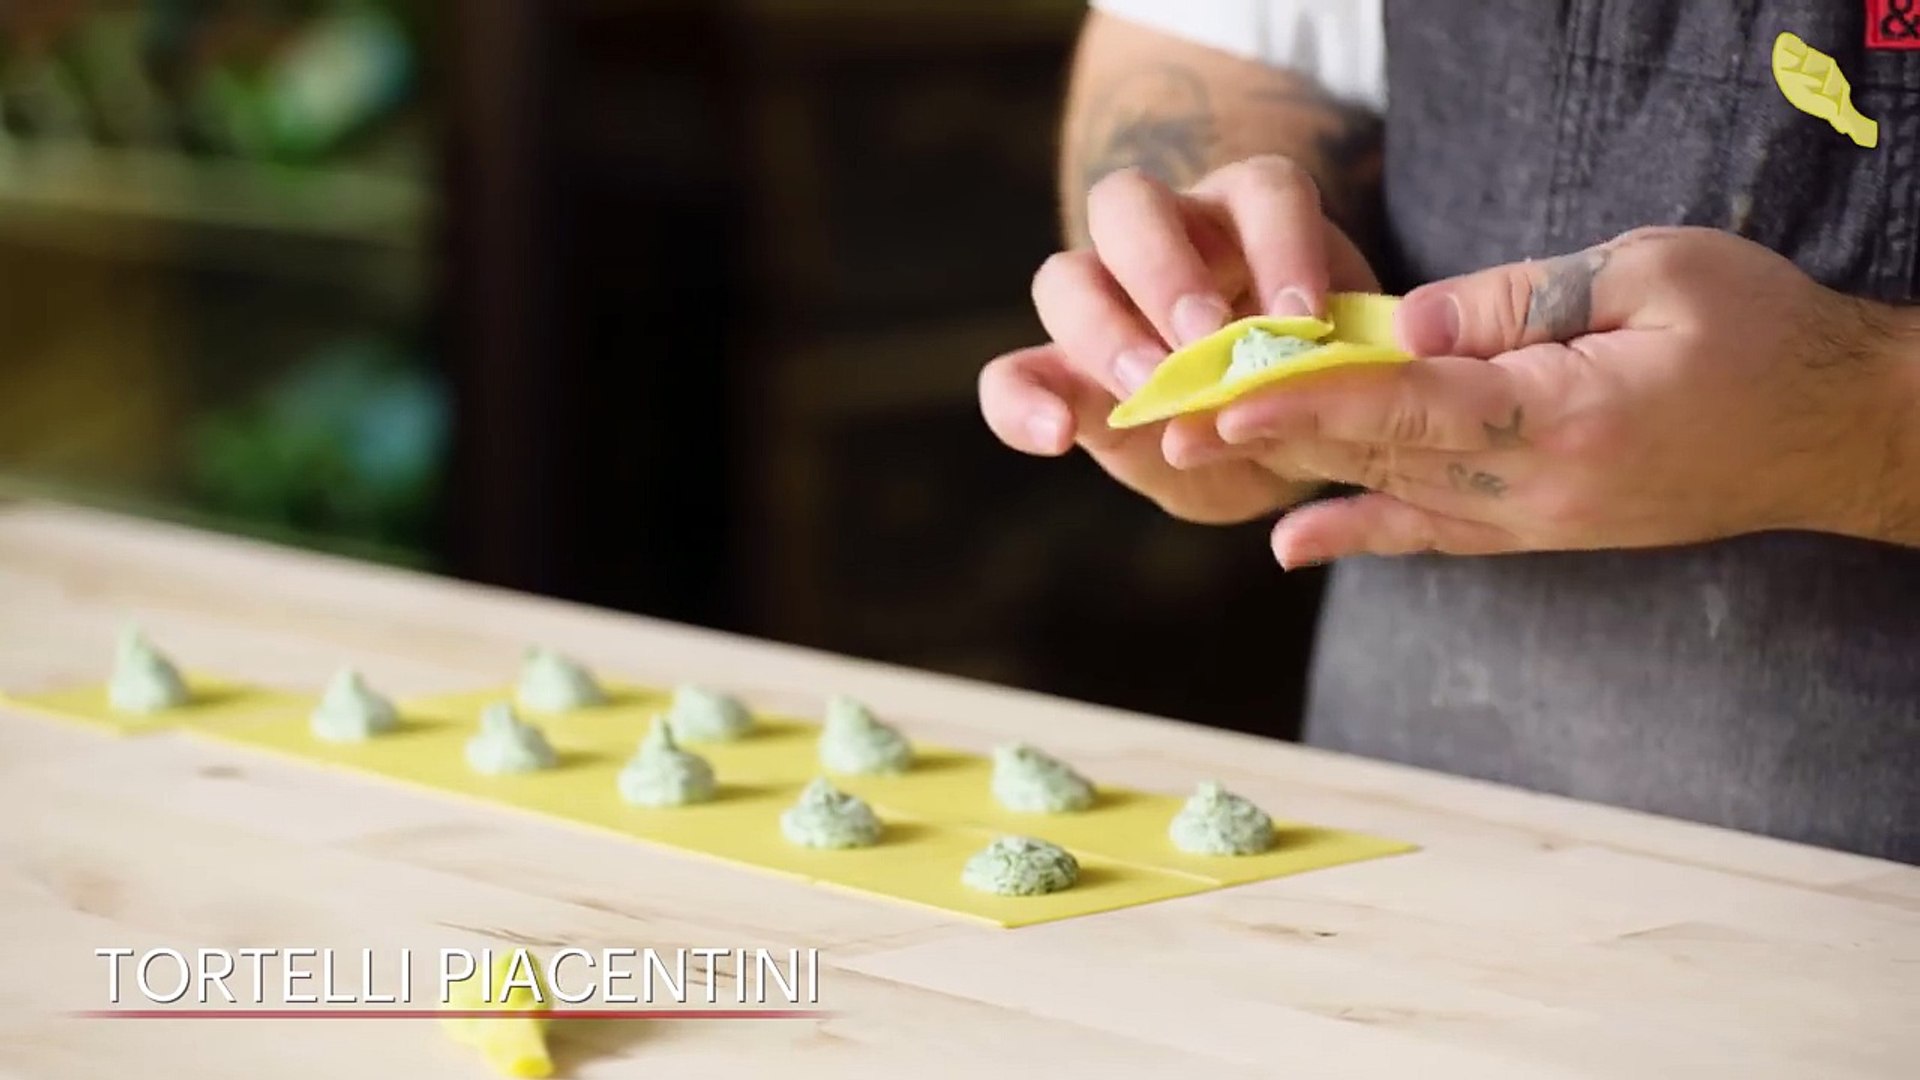 Watch How to Make 29 Handmade Pasta Shapes With 4 Types of Dough